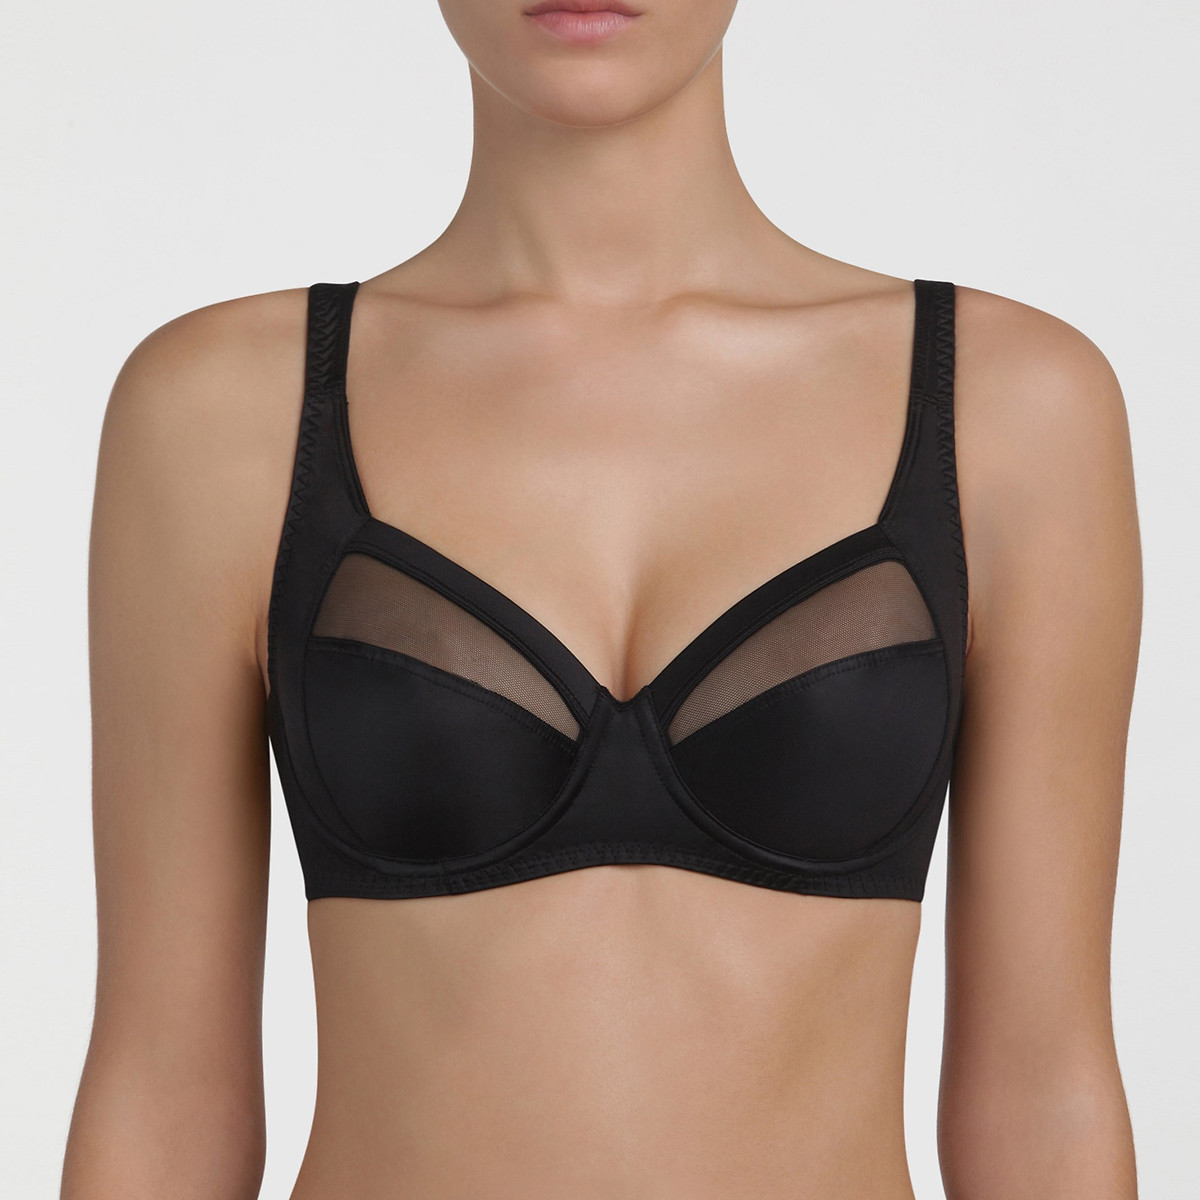 Bra Fitting - A Perfect Silhouette by Ms Mary